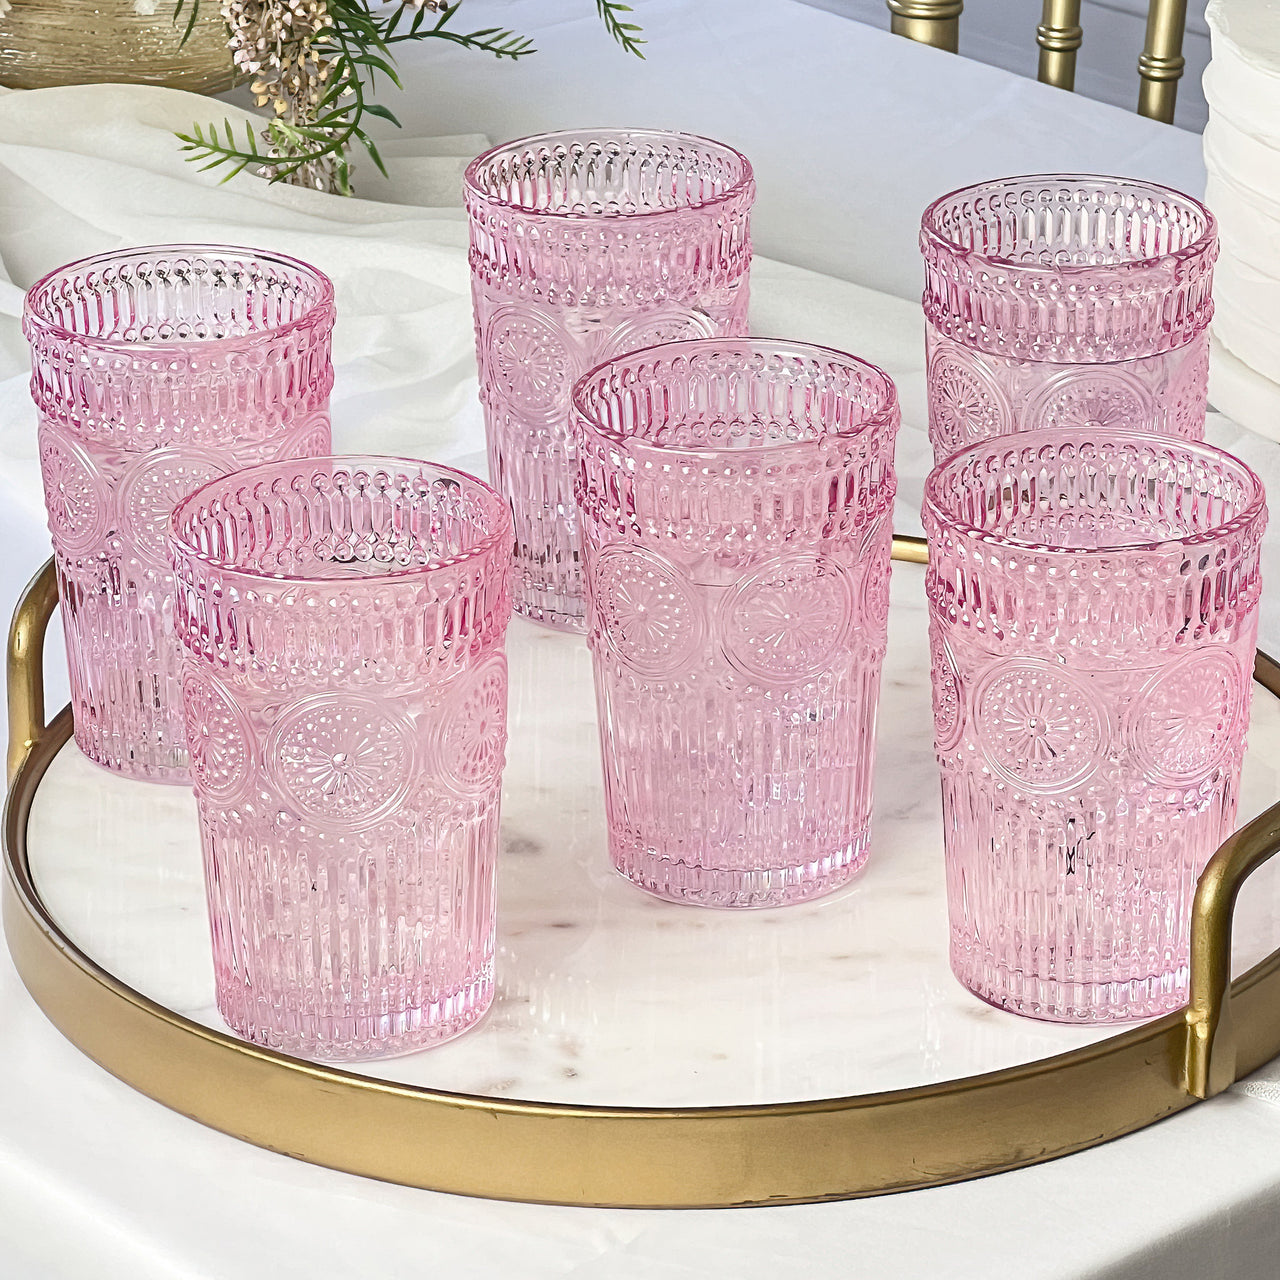 13 oz. Vintage Textured Pink Drinking Glass Cups (Set of 6) - Main Image | My Wedding Favors